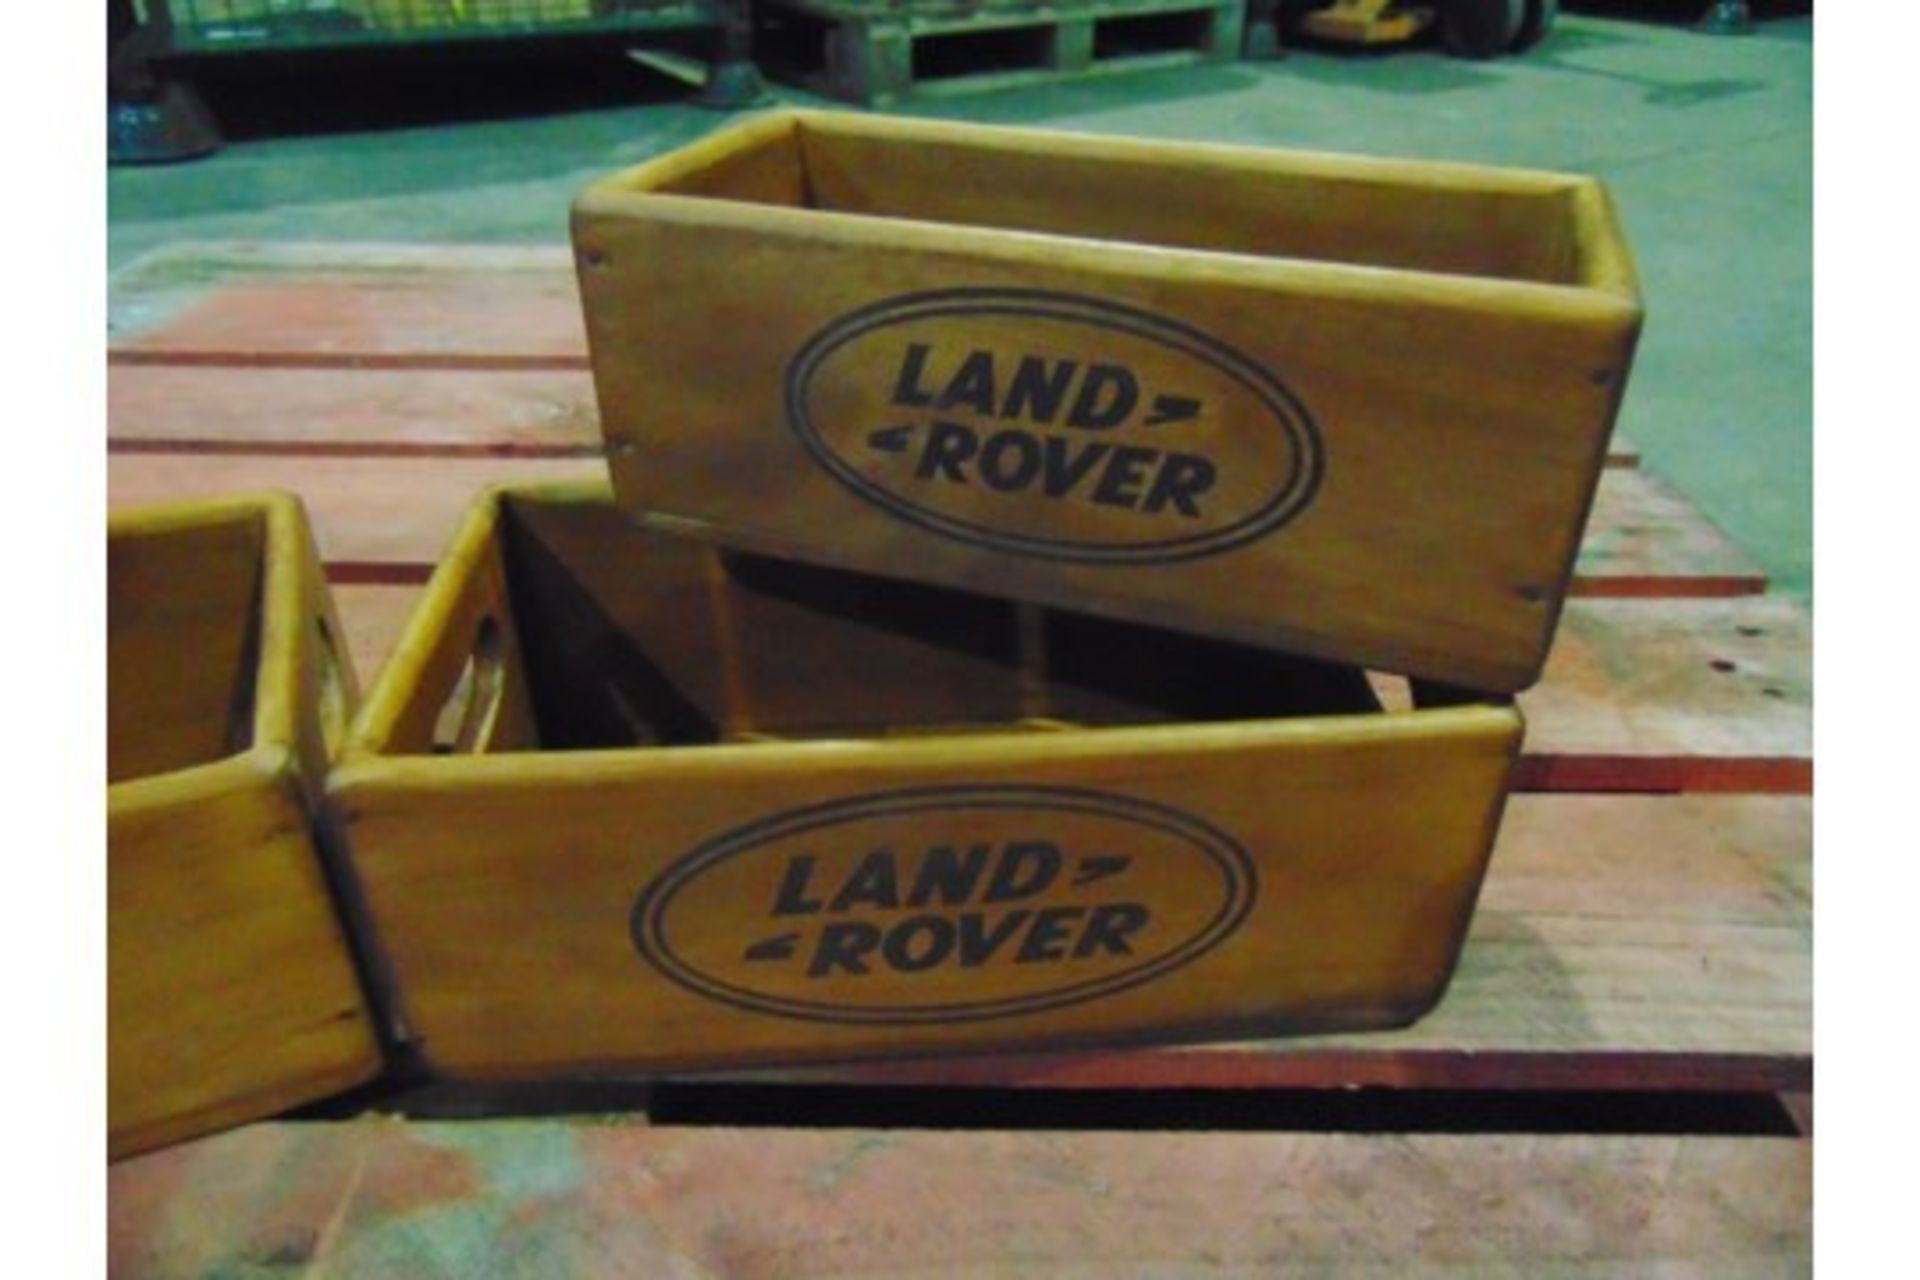 4 x Land Rover Wooden Display / Storage Boxes - Image 3 of 5